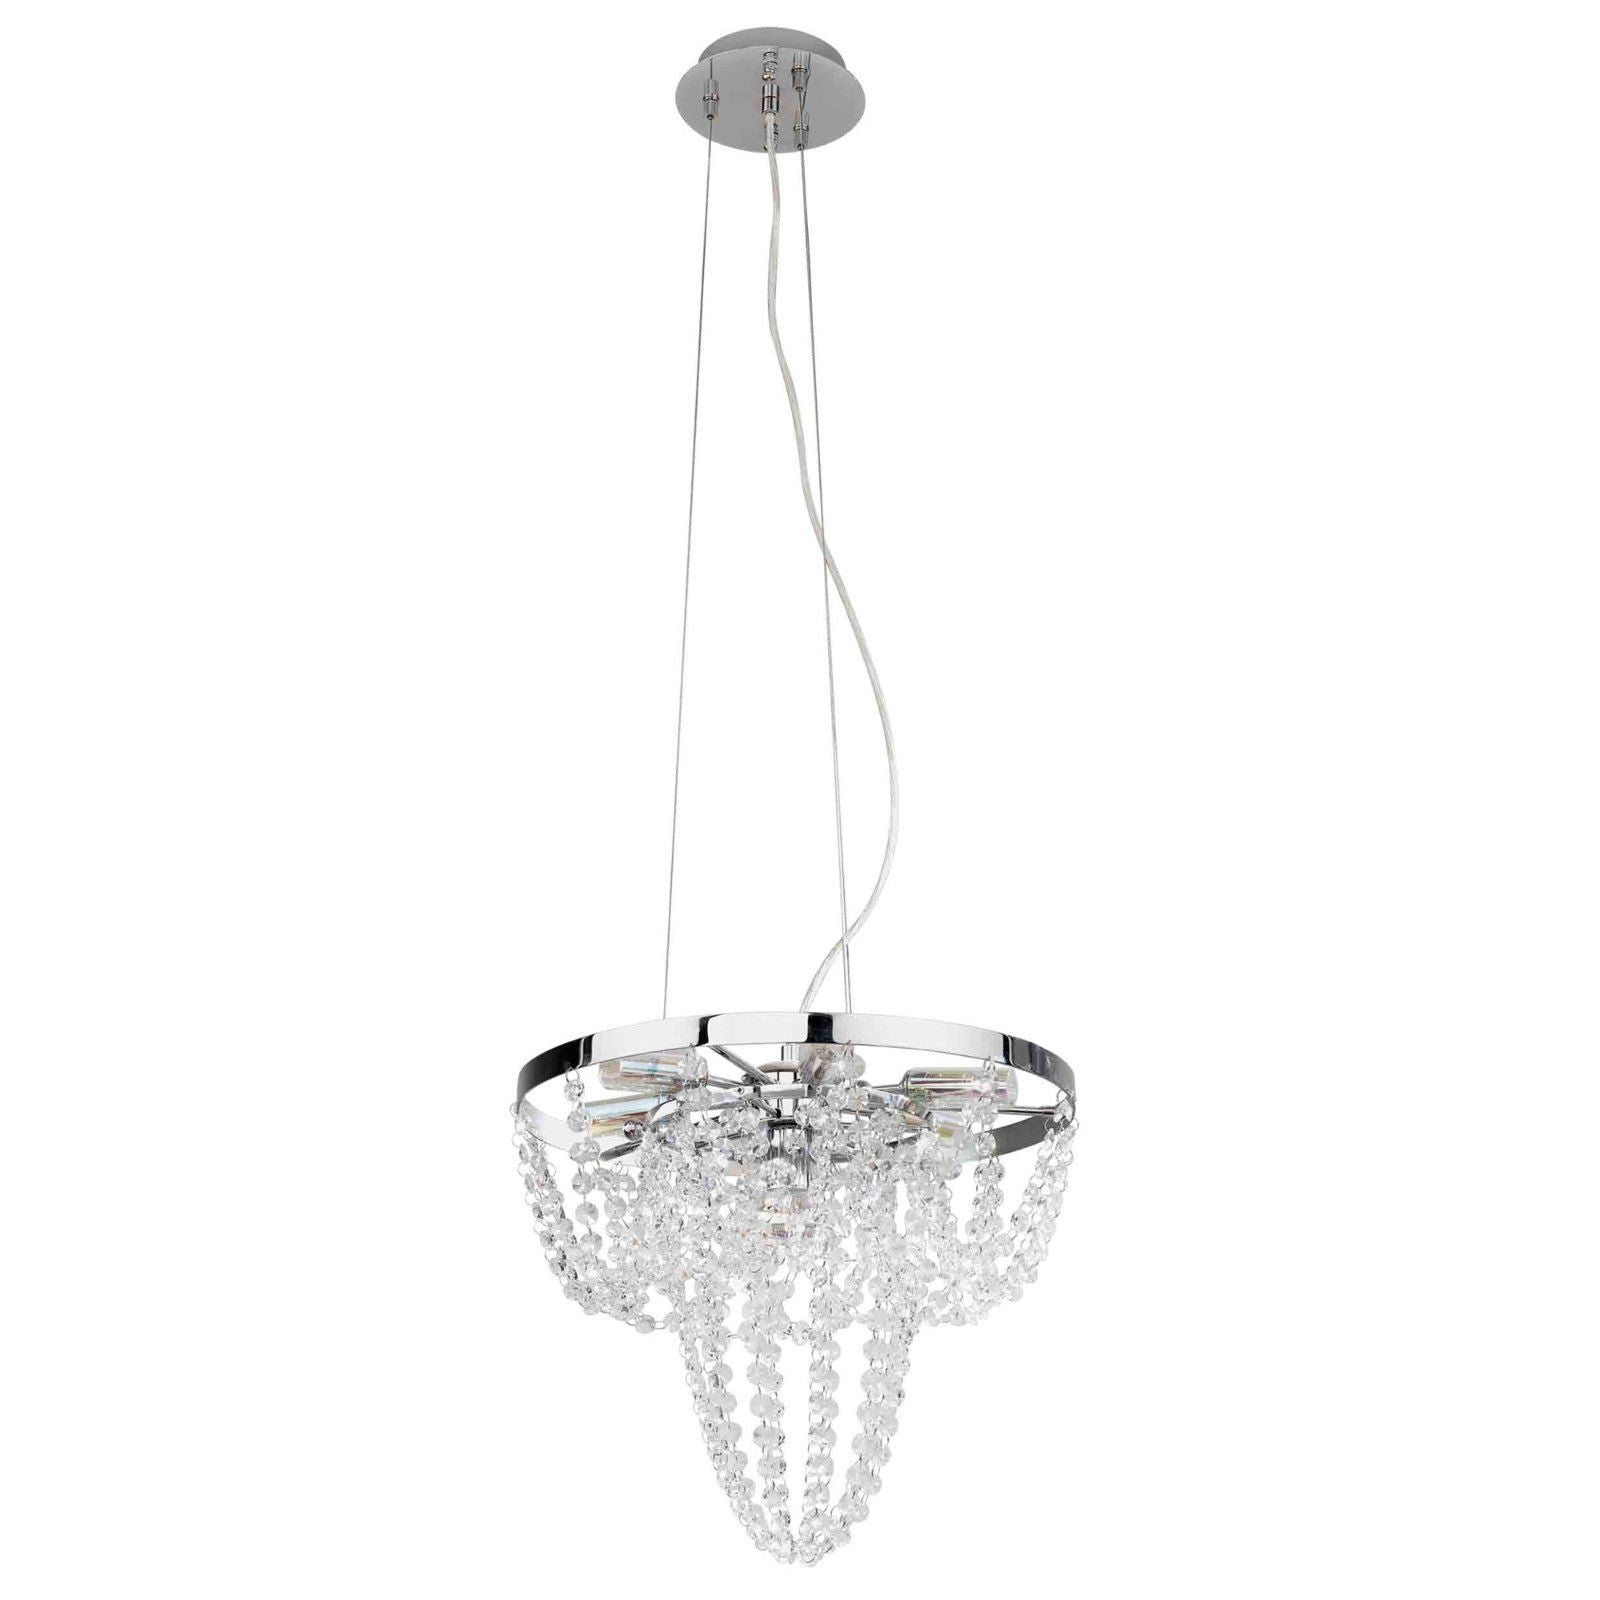 Eglo Lighting 89568A Swindon Collection Six Light Hanging Pendant Chandelier in Polished Chrome Finish